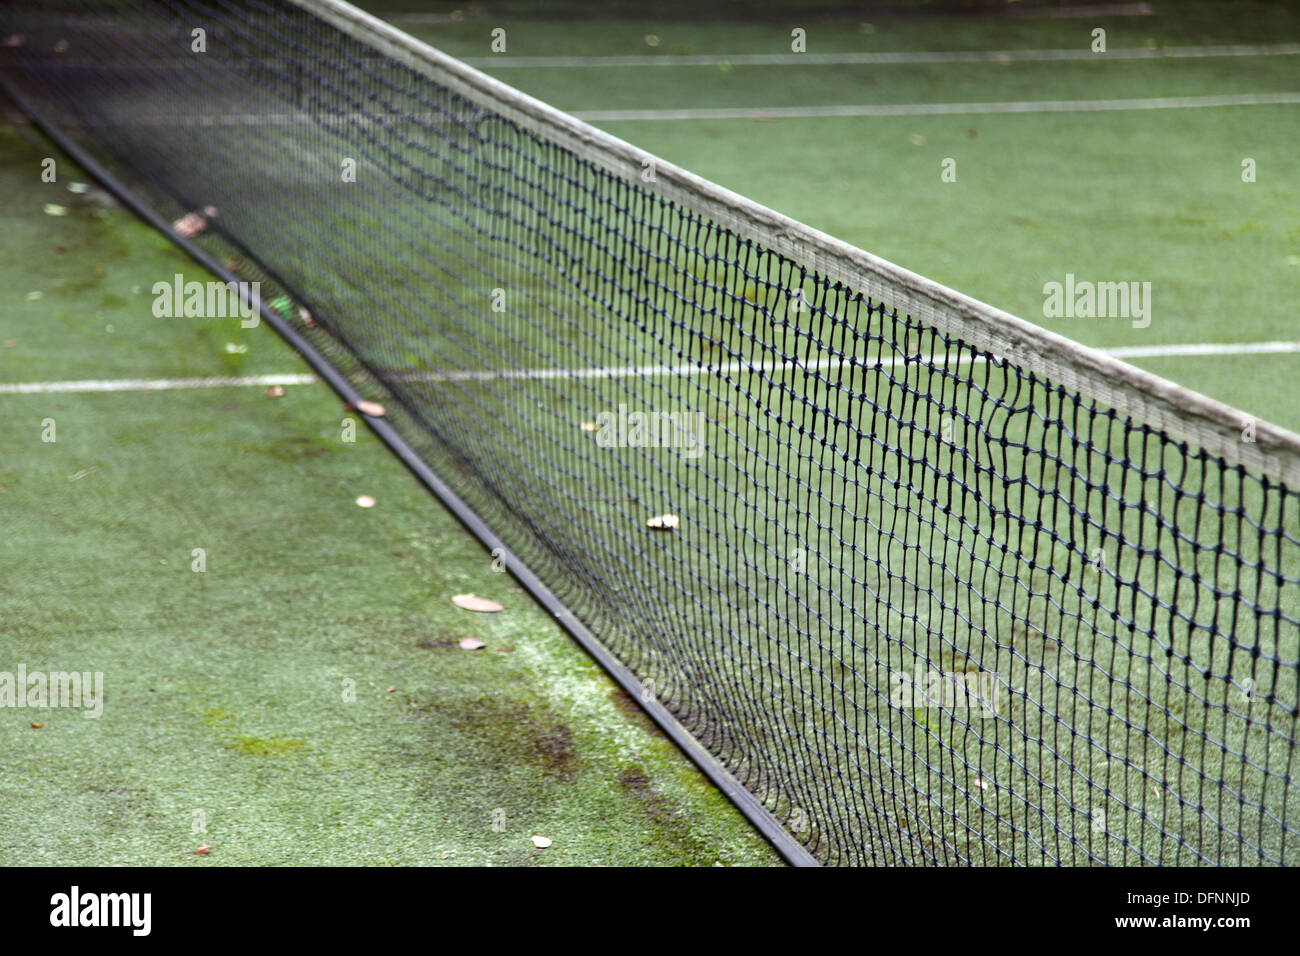 It's a photo of a detail of a grass tennis court. We can see the white lines, the net. It's quite rough and dirty. Stock Photo